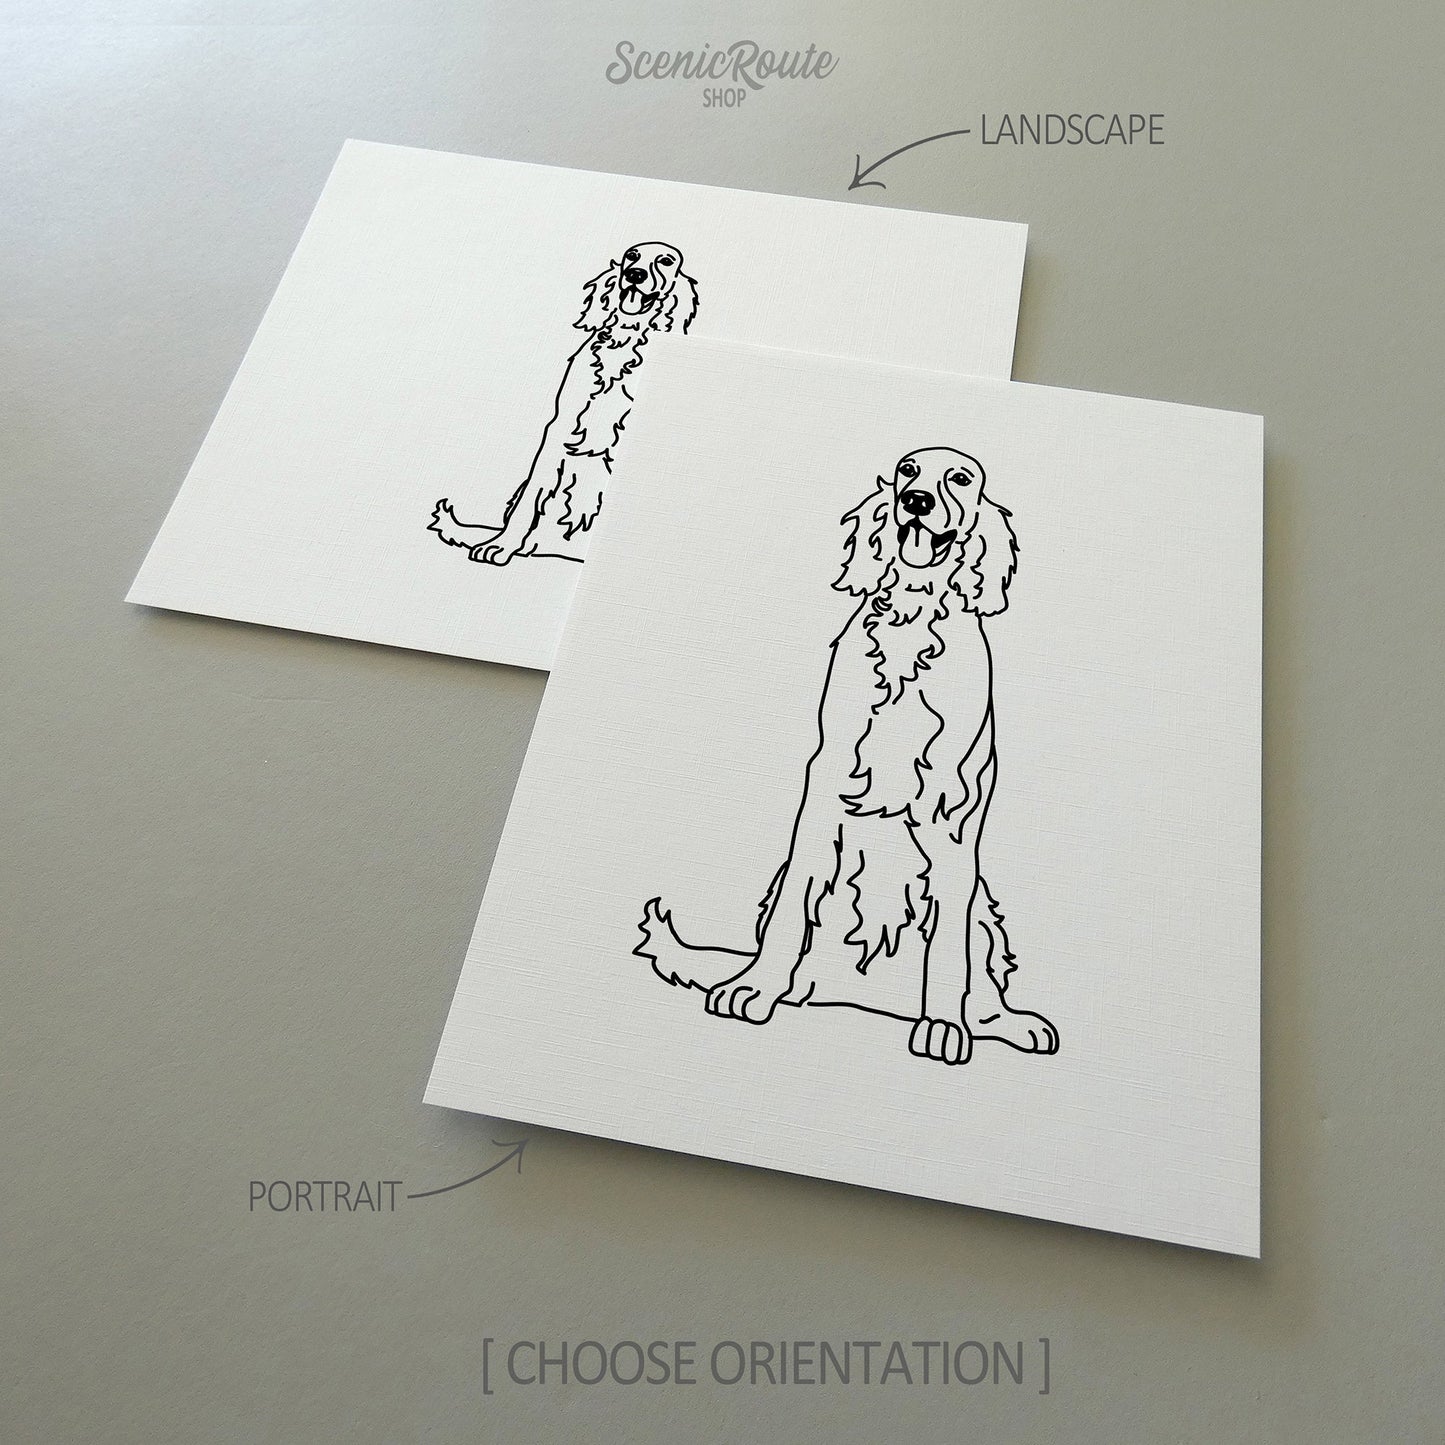 Two line art drawings of an Irish Setter dog on white linen paper with a gray background.  The pieces are shown in portrait and landscape orientation for the available art print options.